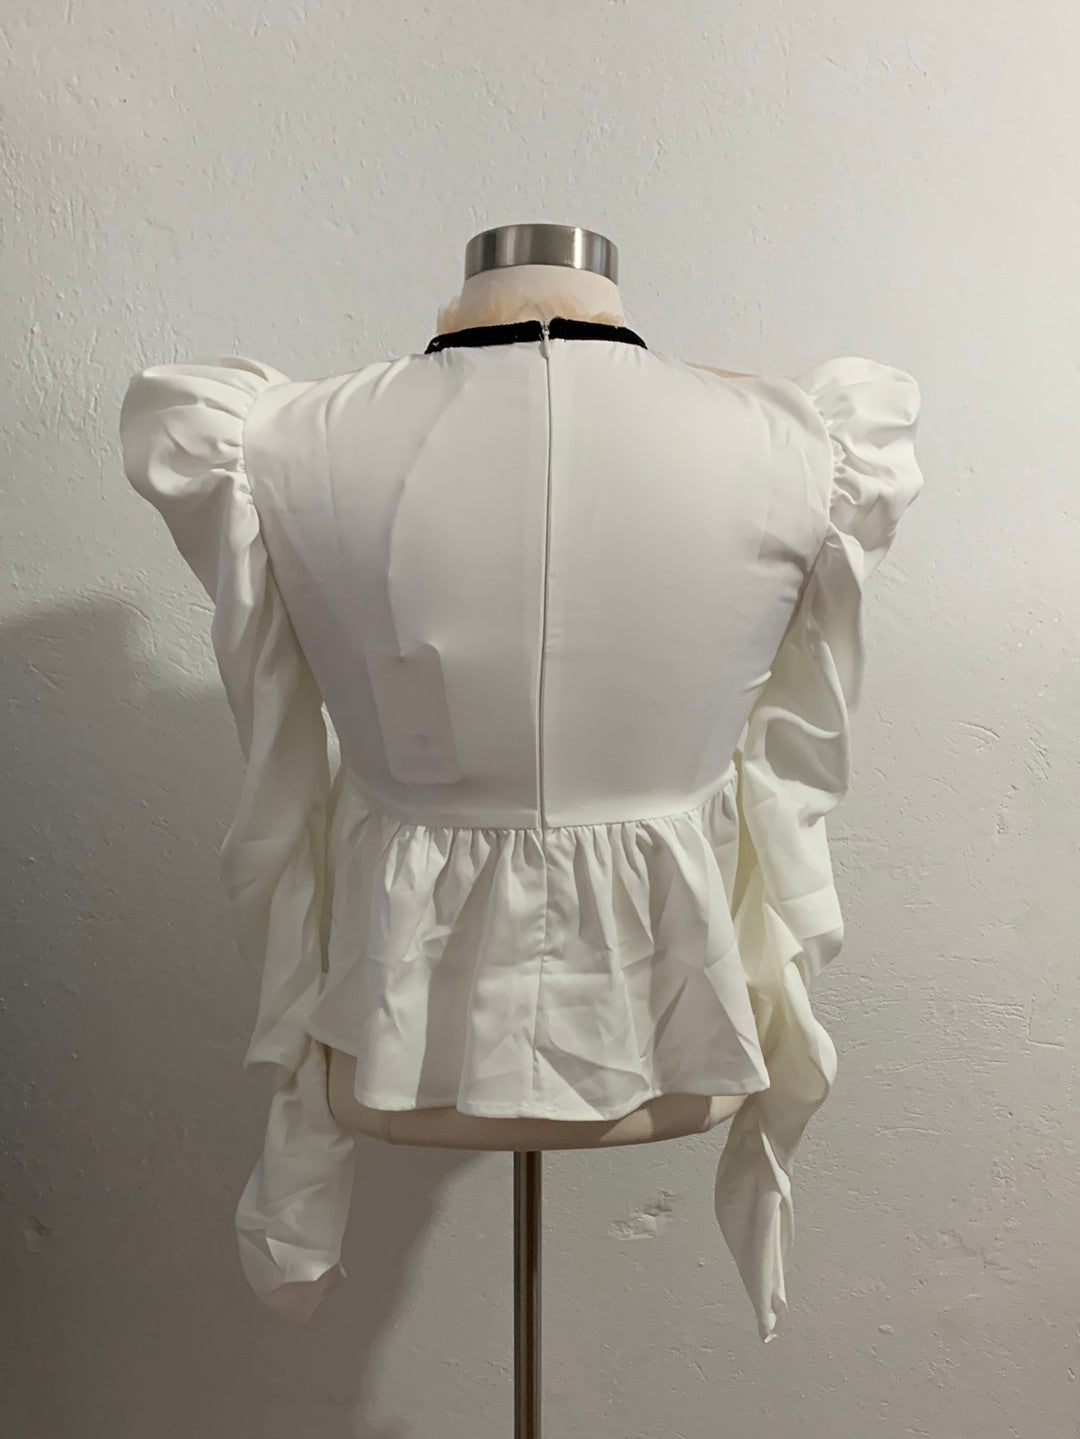 LONG SLEEVE WHITE BLOUSE  WITH BLACK BOW